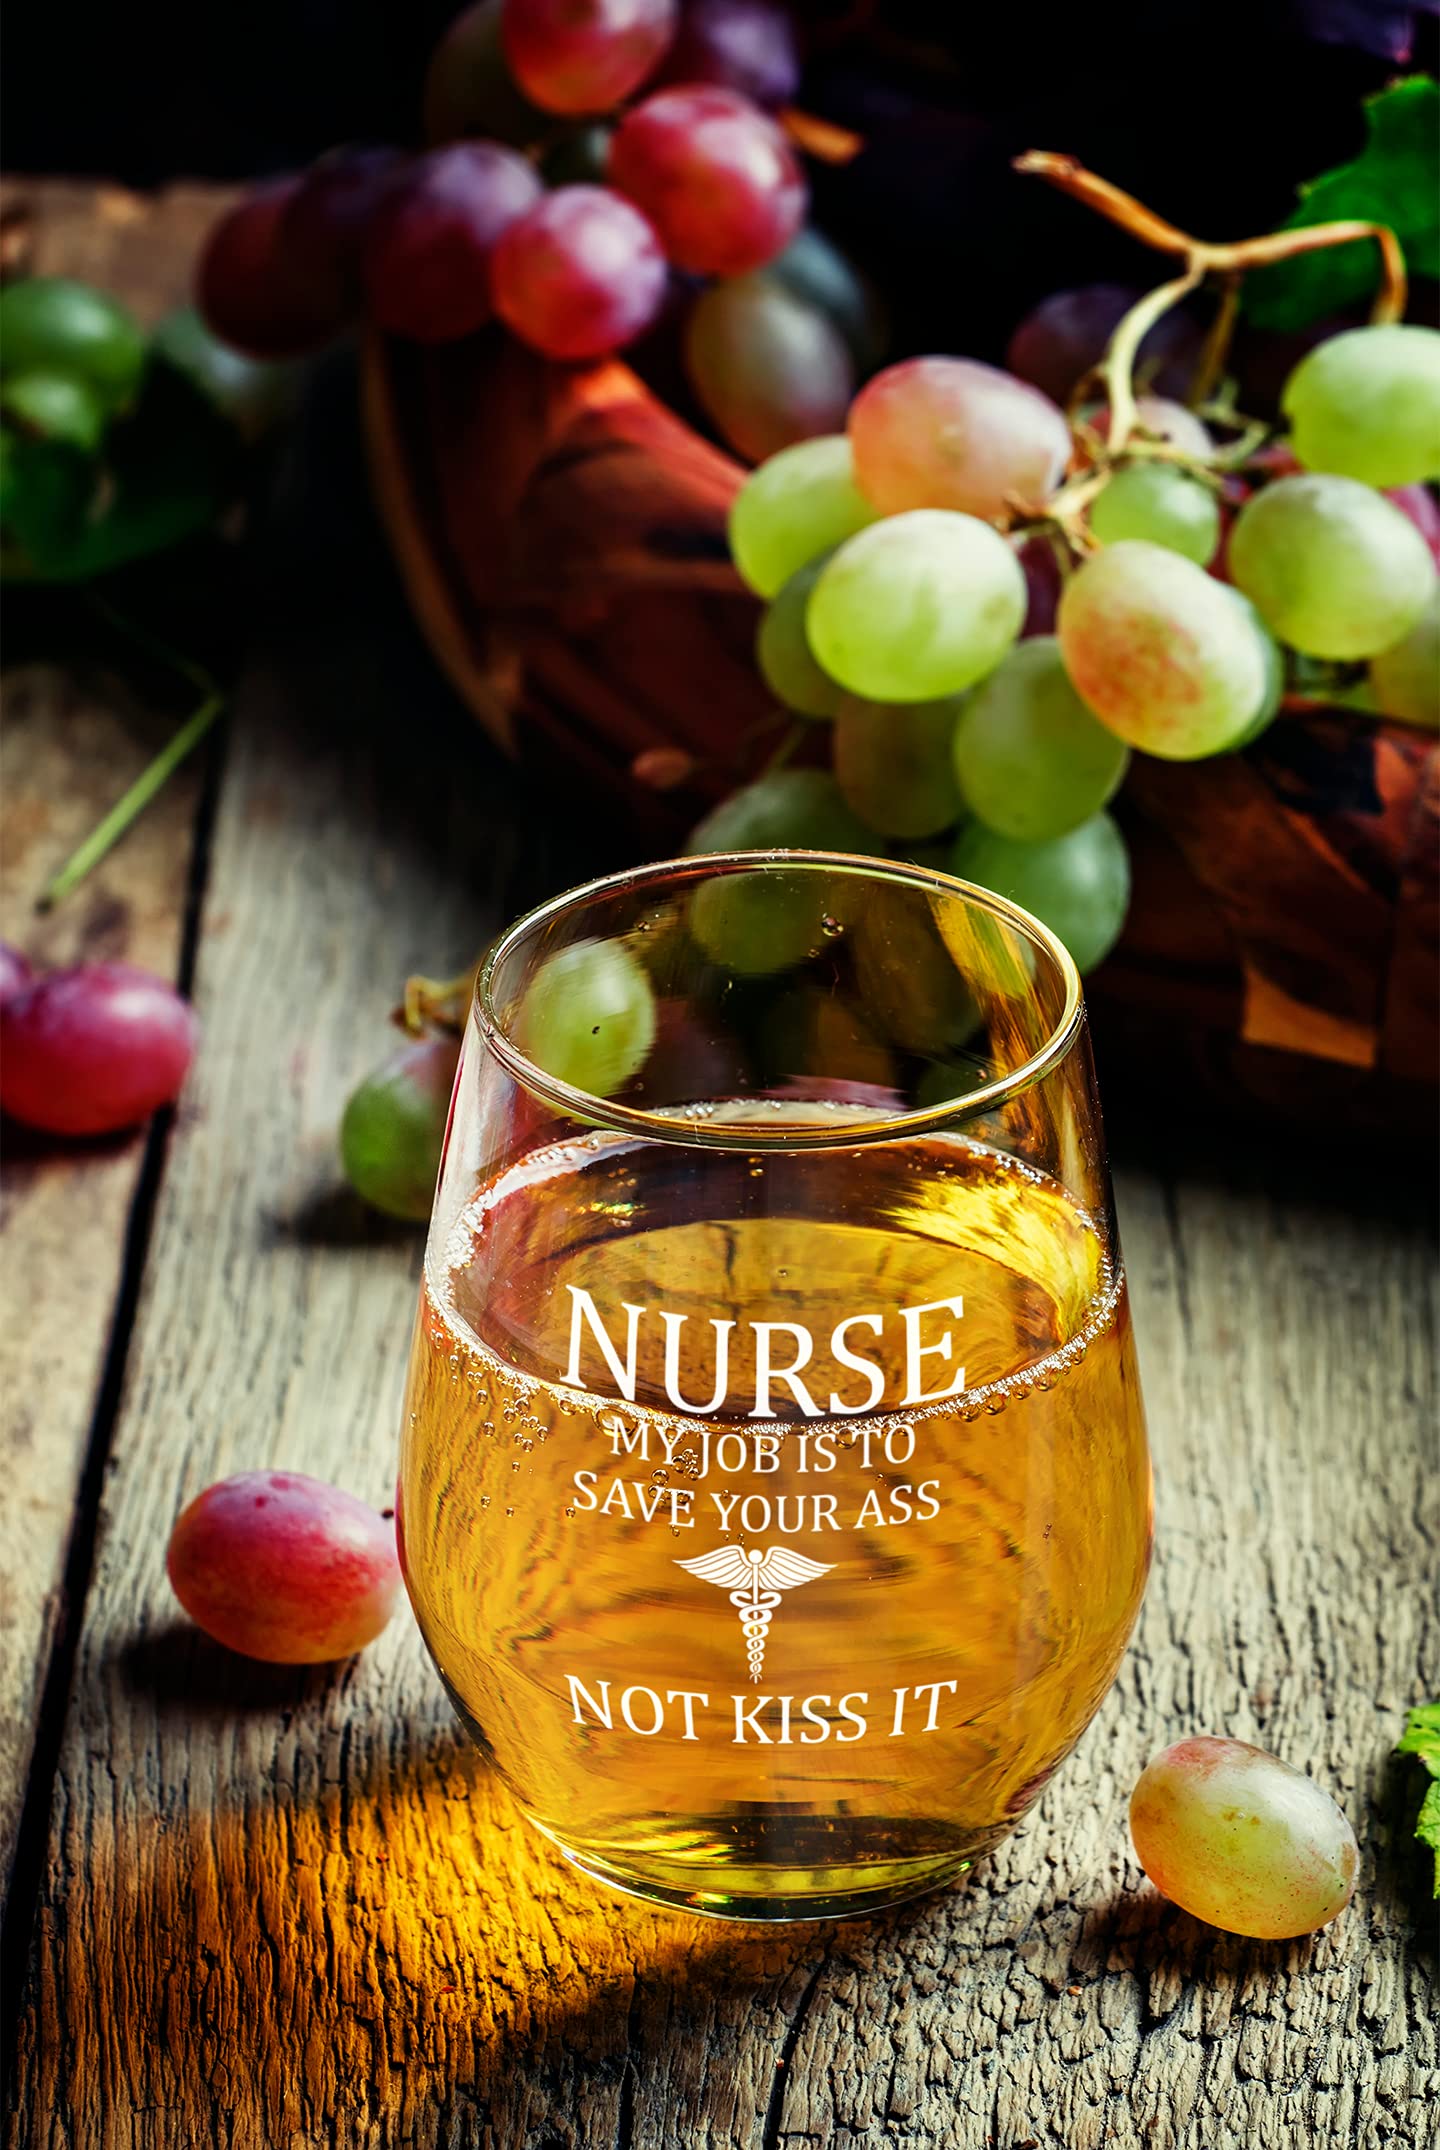 Find Funny Gift Ideas Nurse Wine Glasses for Women | RN Gifts for Nurses Women, ER Nurse Funny Gifts for Nurses Female, Nurses Gifts for Male Nurses | My Job Is To Save Your Rear Not Kiss It